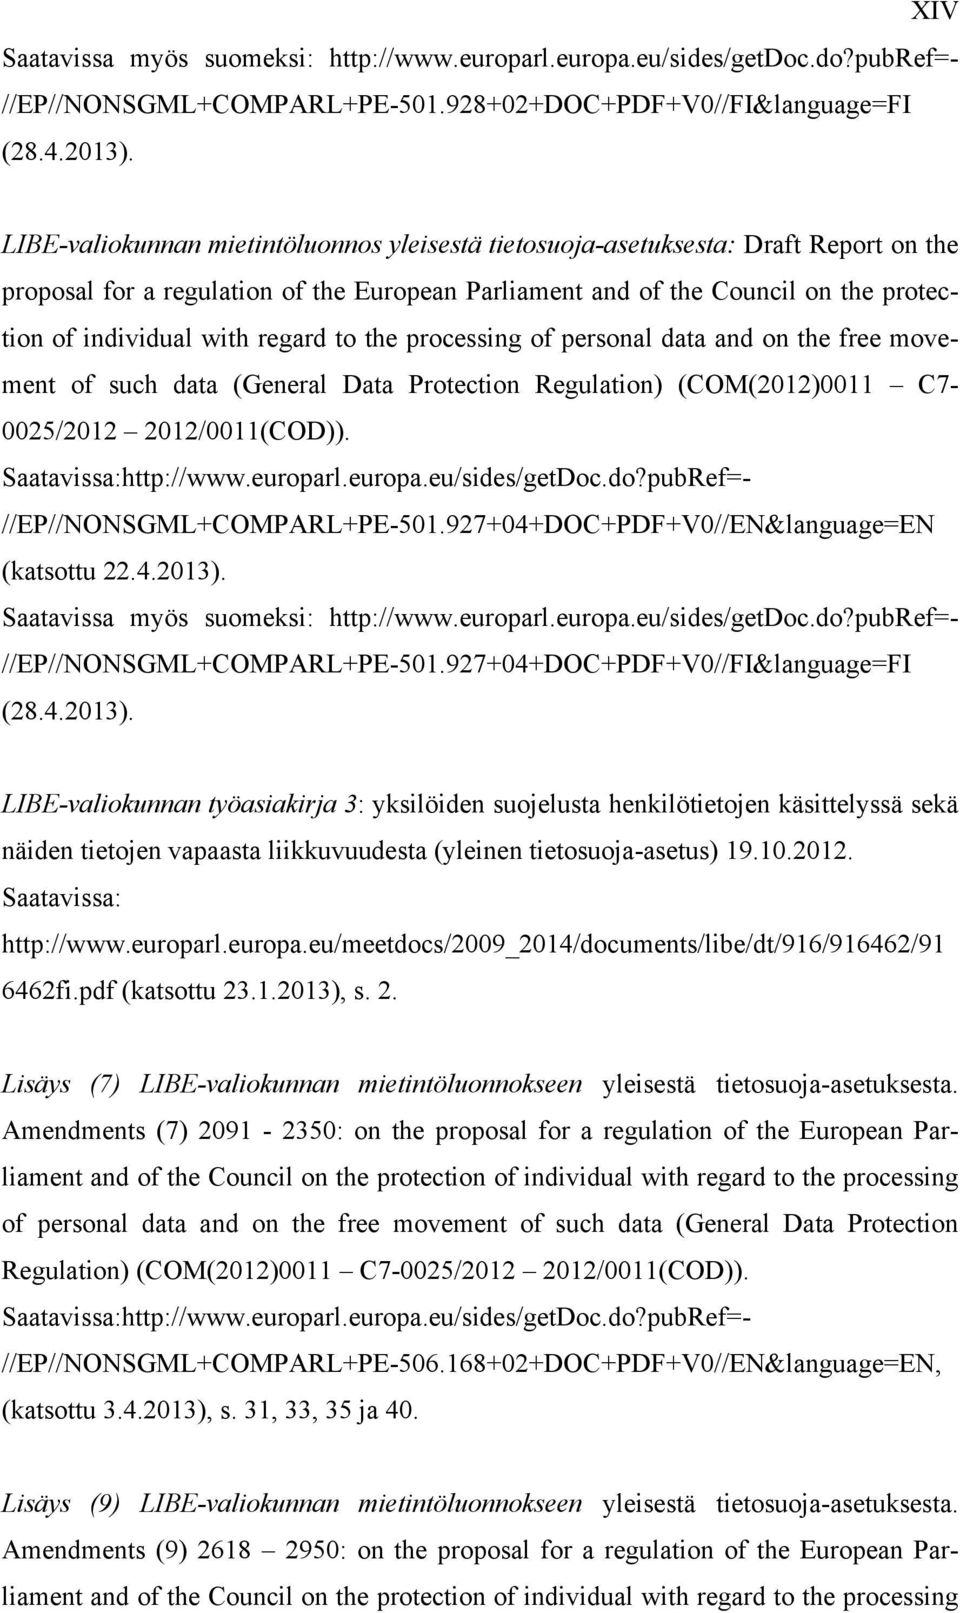 regard to the processing of personal data and on the free movement of such data (General Data Protection Regulation) (COM(2012)0011 C7-0025/2012 2012/0011(COD)). Saatavissa:http://www.europar